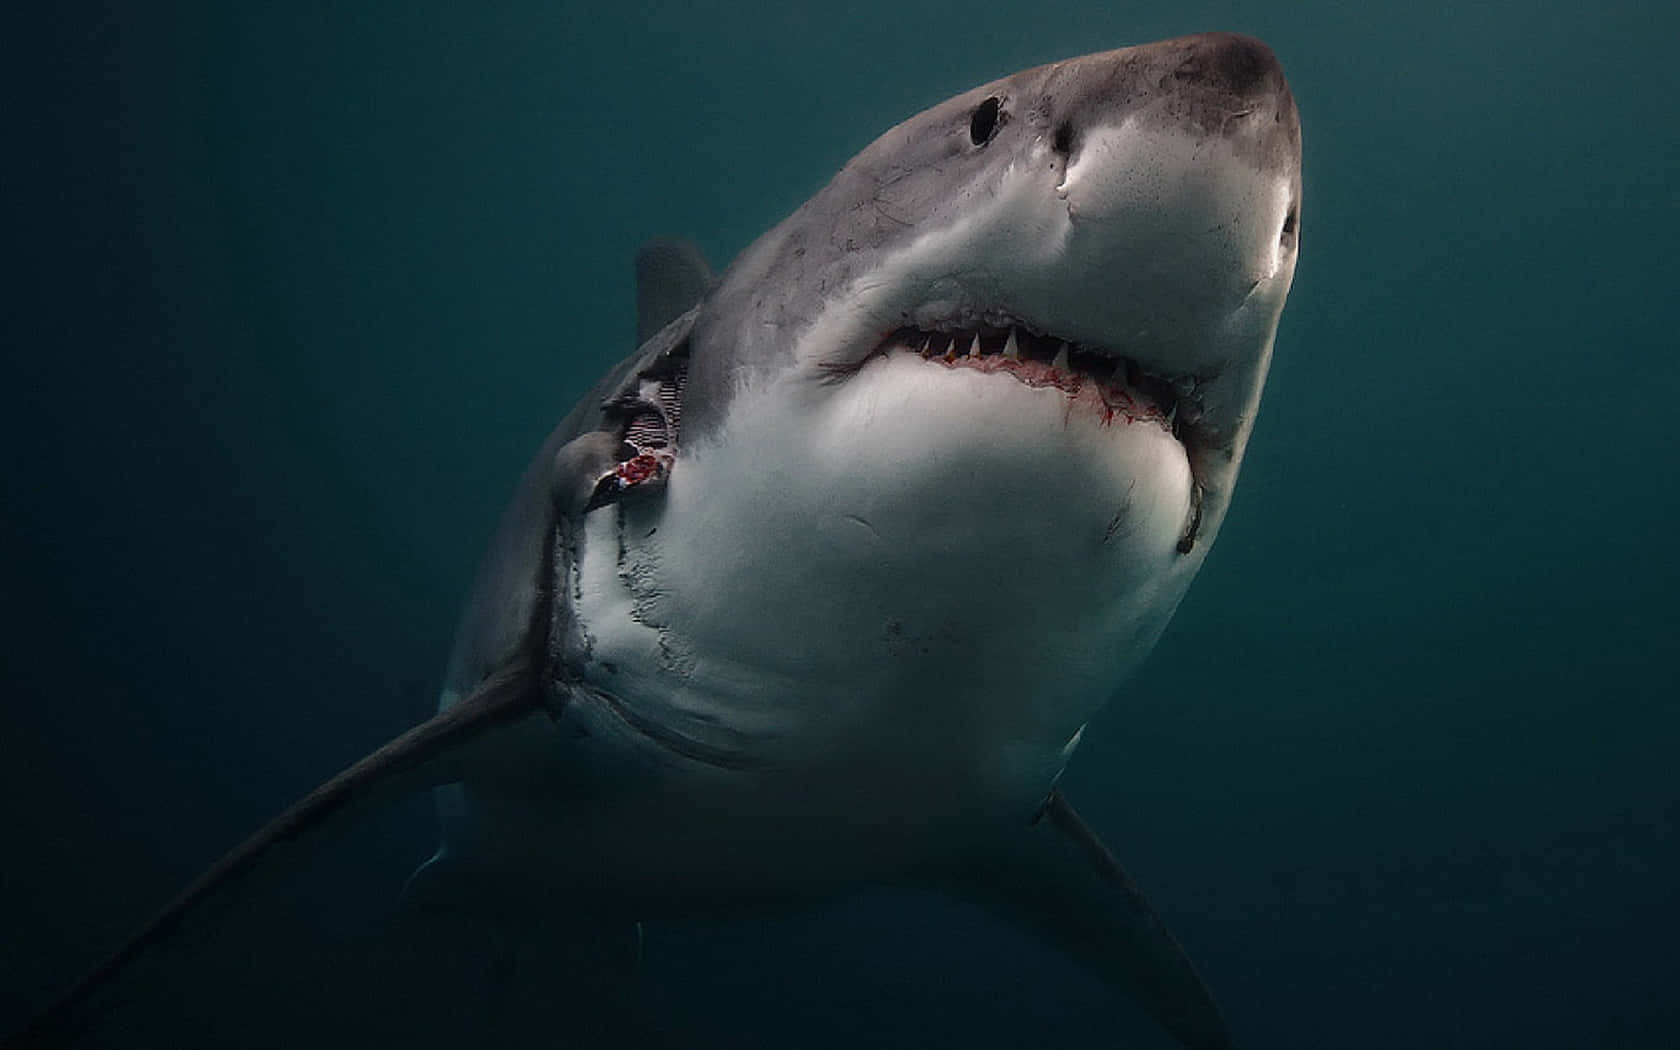 Take a Closer Look Into the underwater world of Great White Sharks